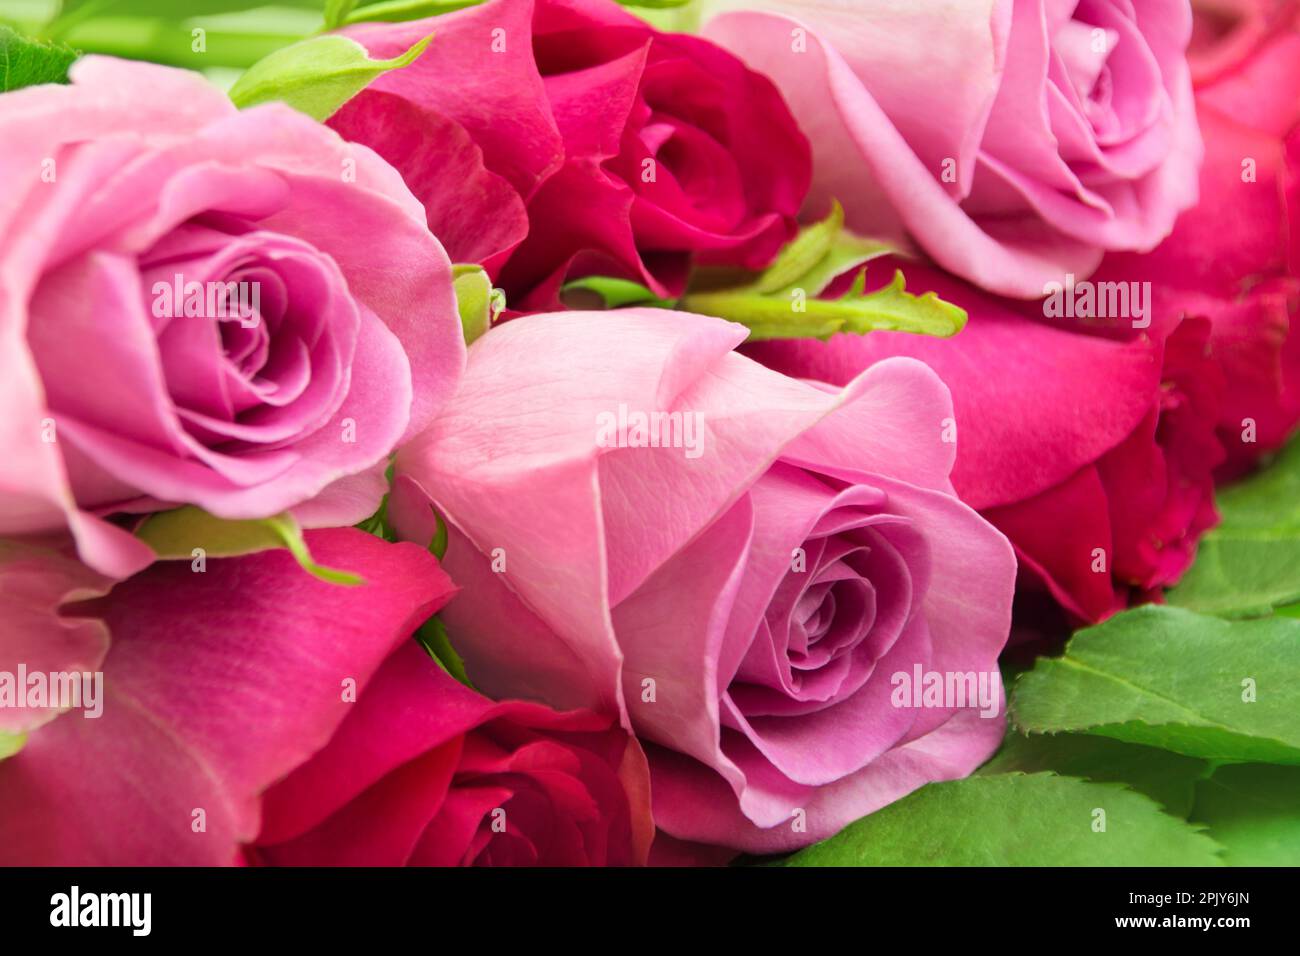 Bouquet of red and pink roses close up Stock Photo